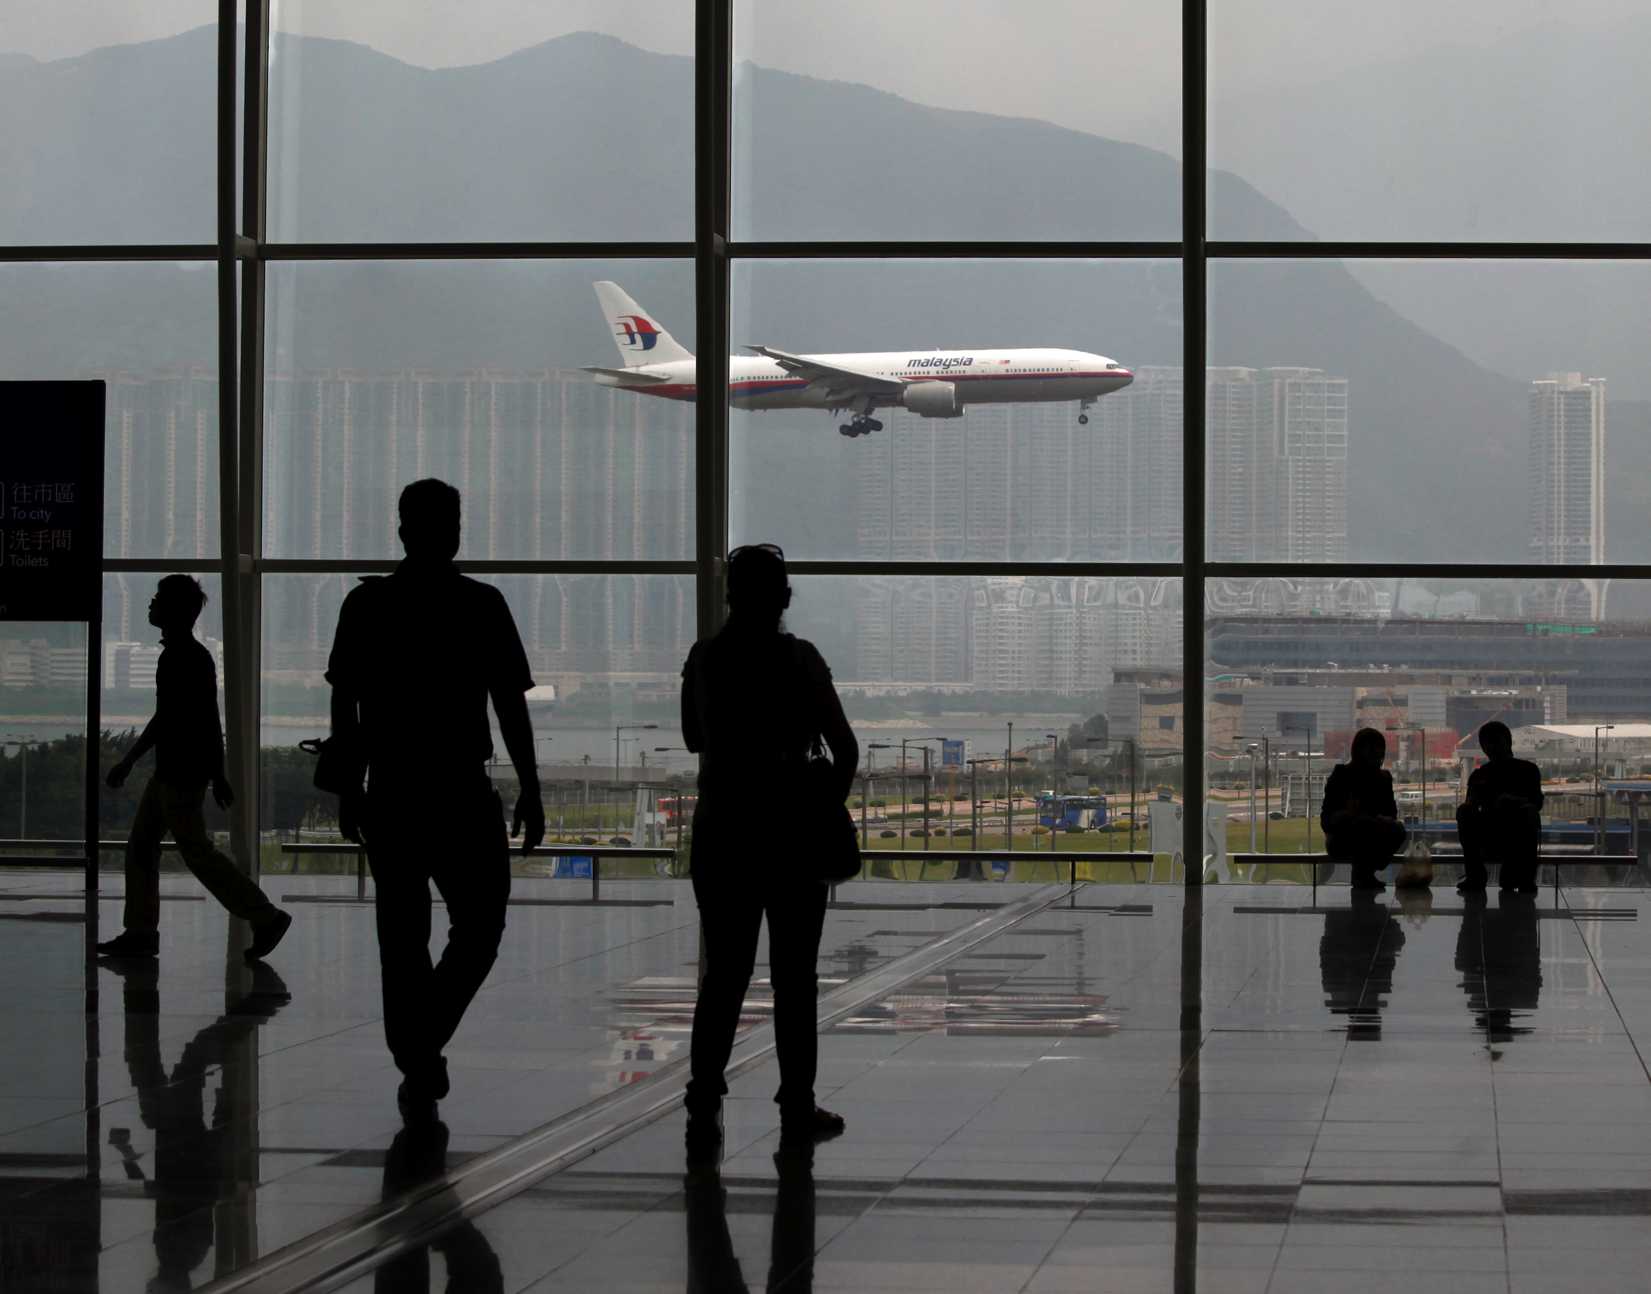 A Malaysia Airlines Boeing 777 plane is seen from the departure hall at the Hong Kong International Airport in a file photo taken in June 2011